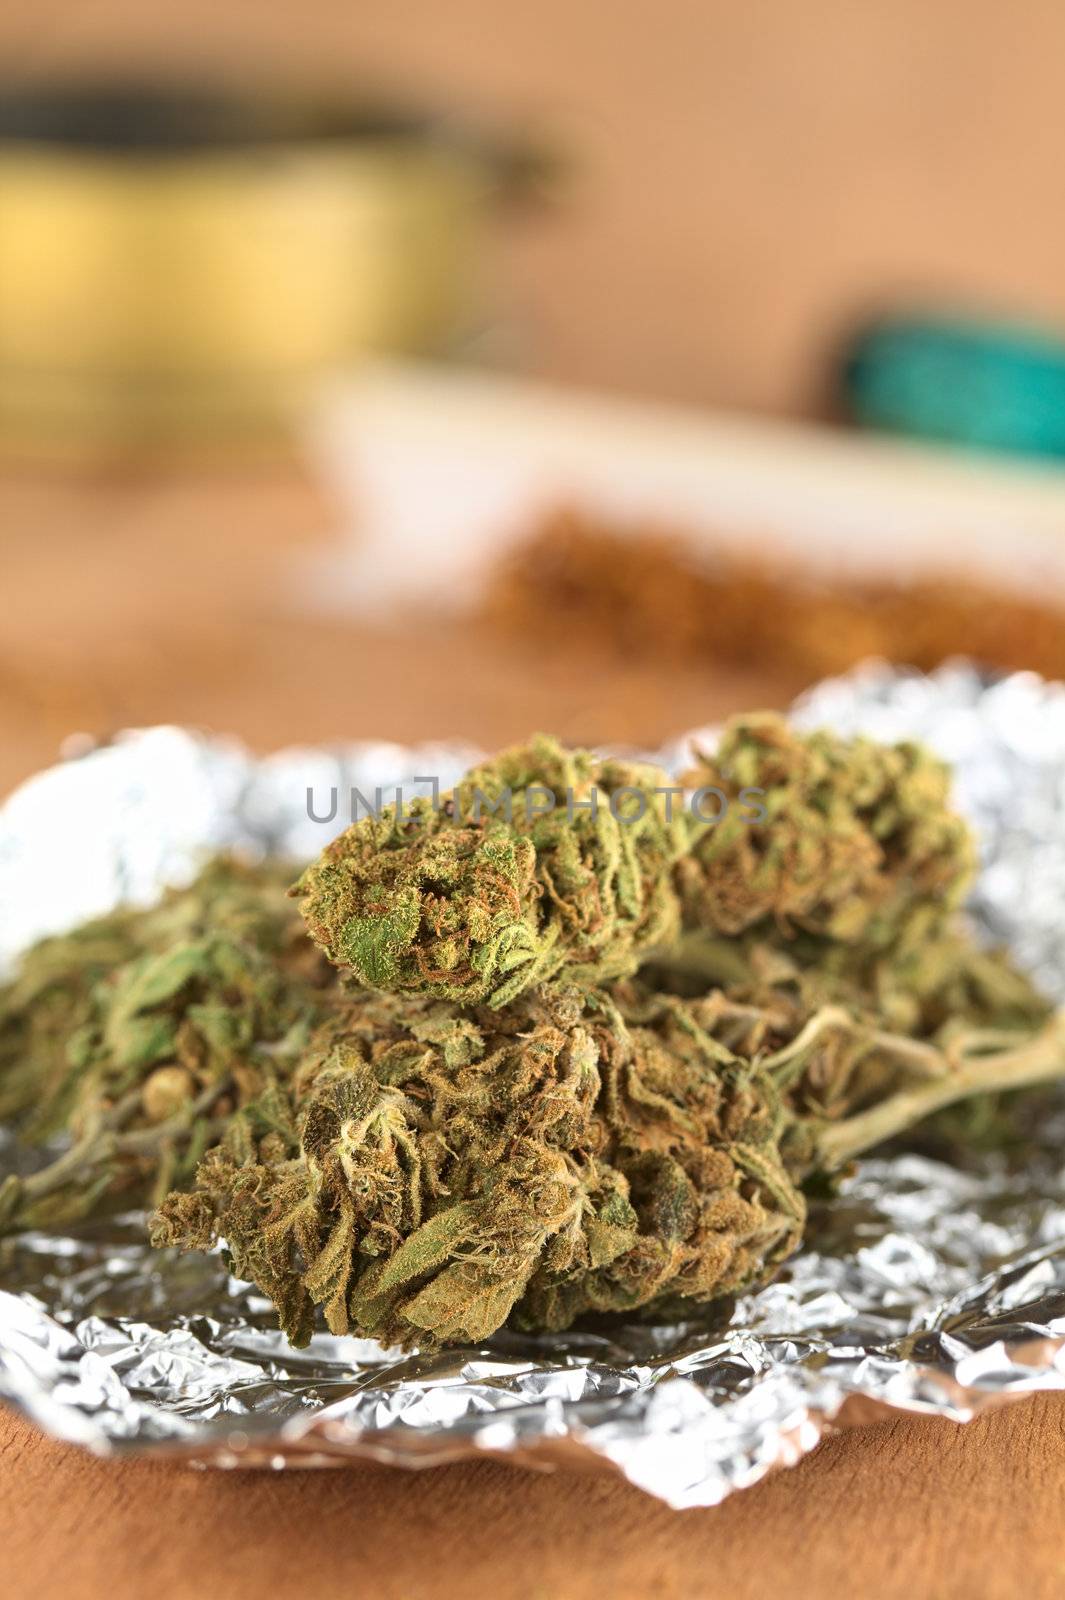 Dried flowers of Cannabis sativa on tinfoil (Selective Focus, Focus on the front of the two heads in the front) 